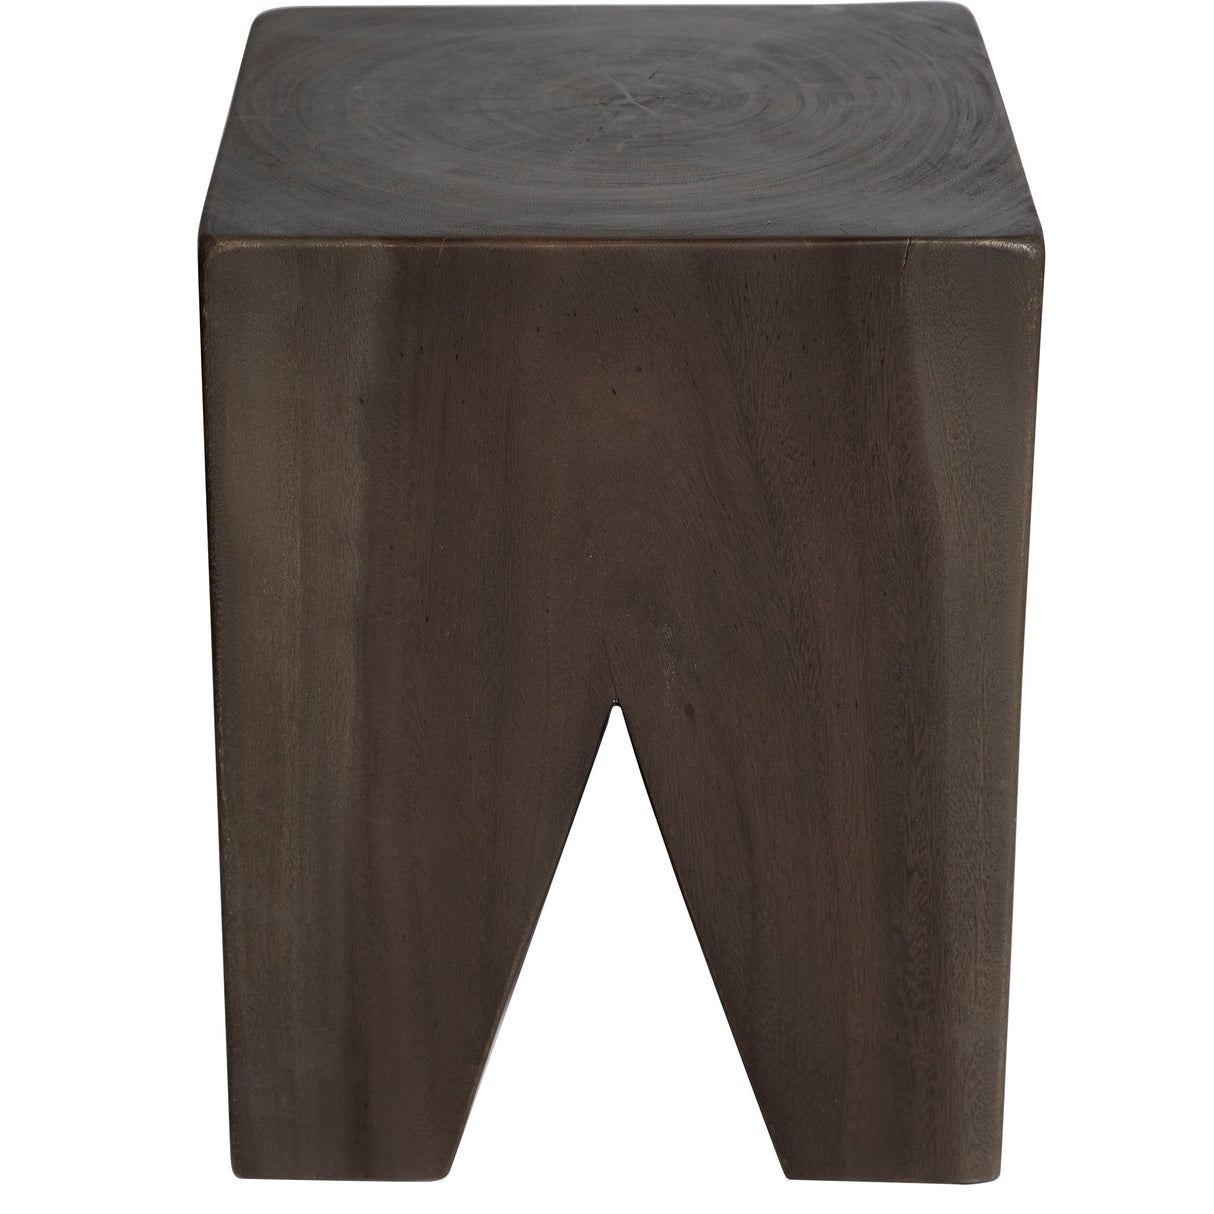 Armin - Solid Wood Accent Stool - Brown, Dark